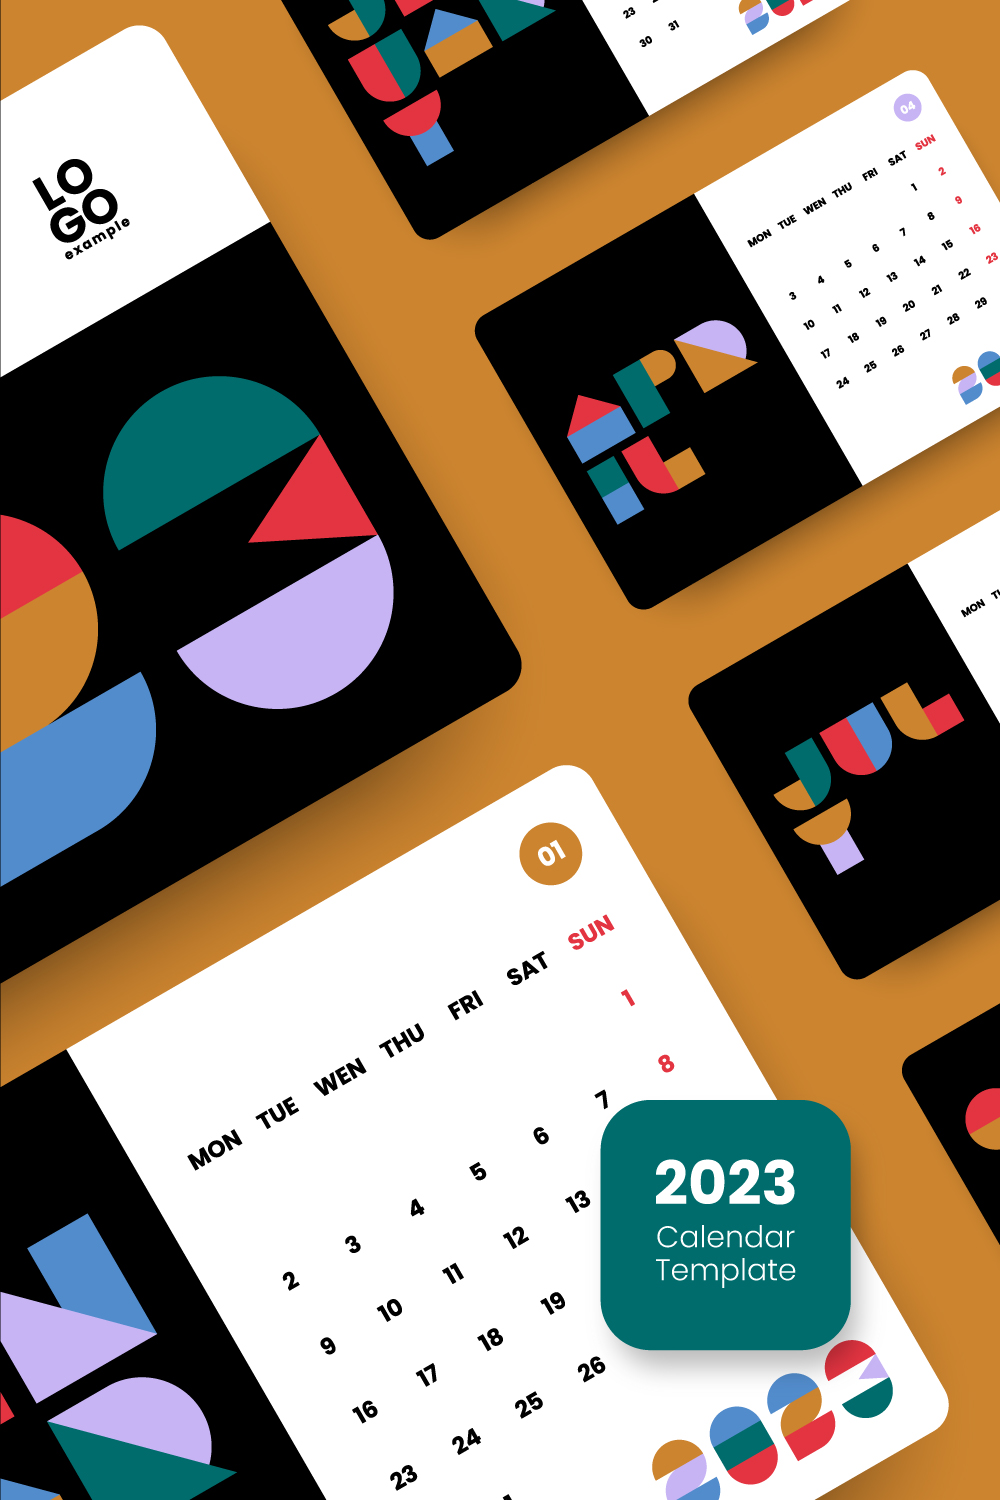 2023 Calendar Template With Typography - pinterest image preview.